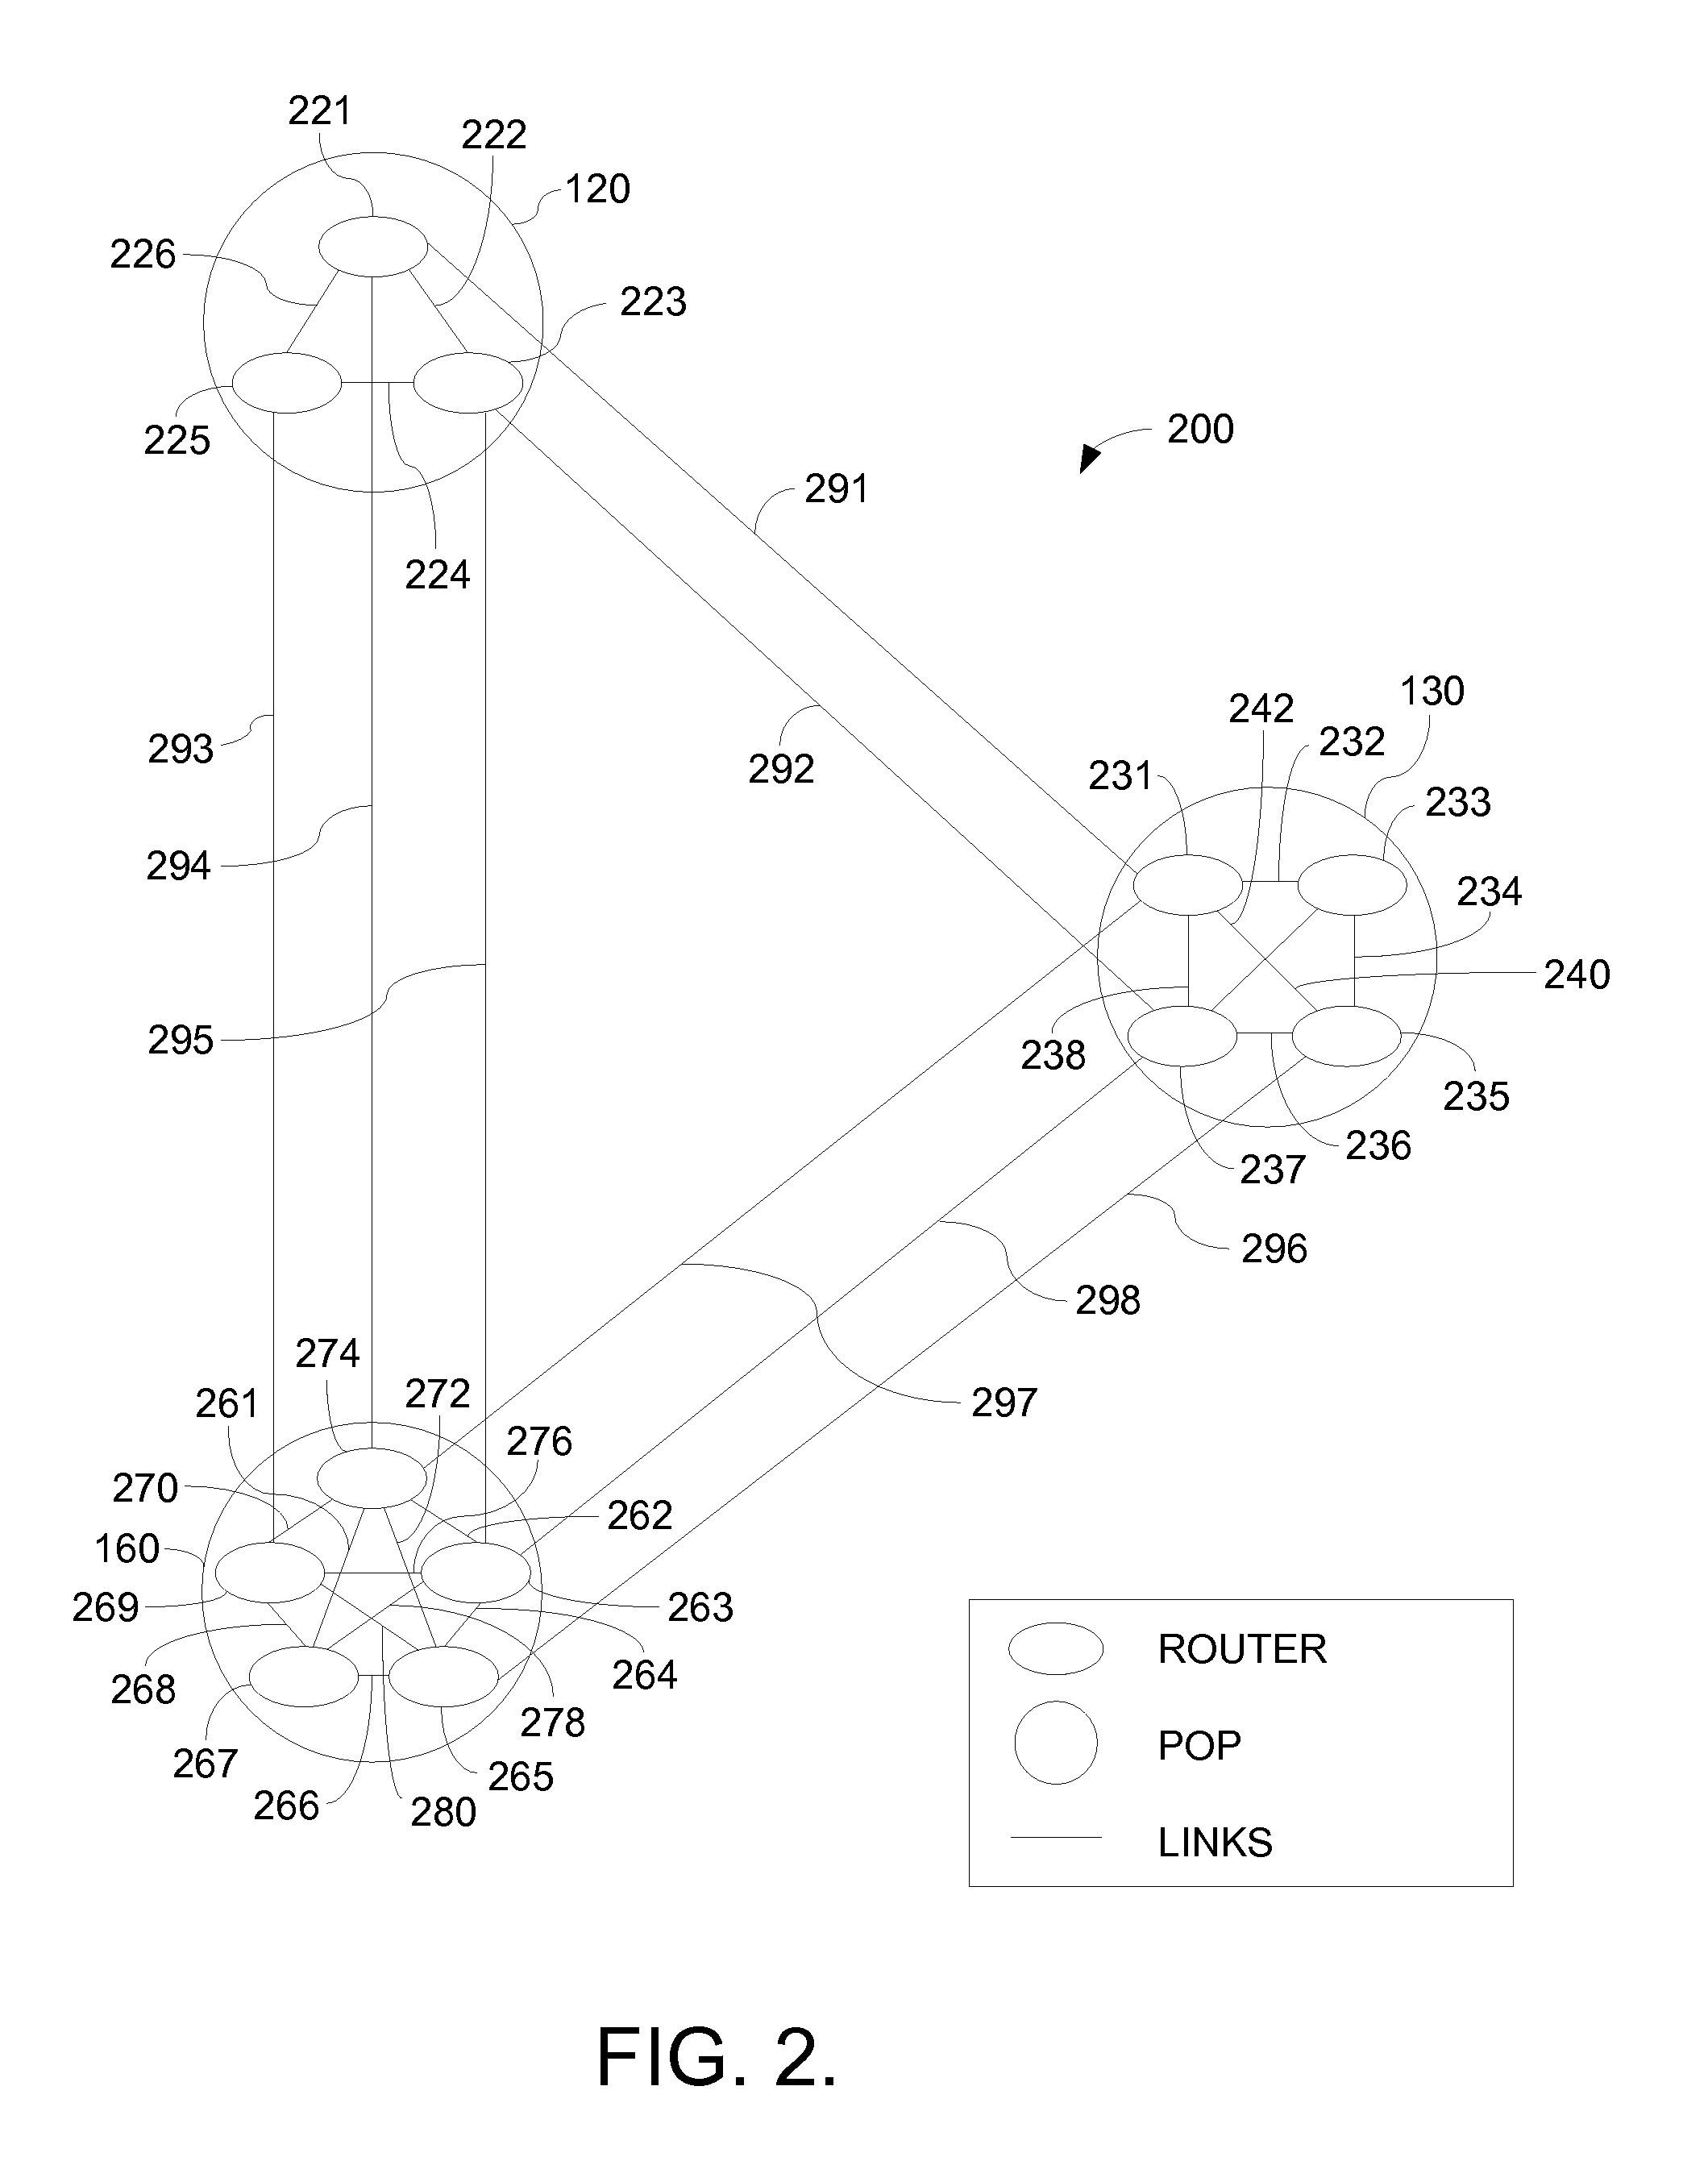 Method for deflection routing of data packets to alleviate link overload in IP networks